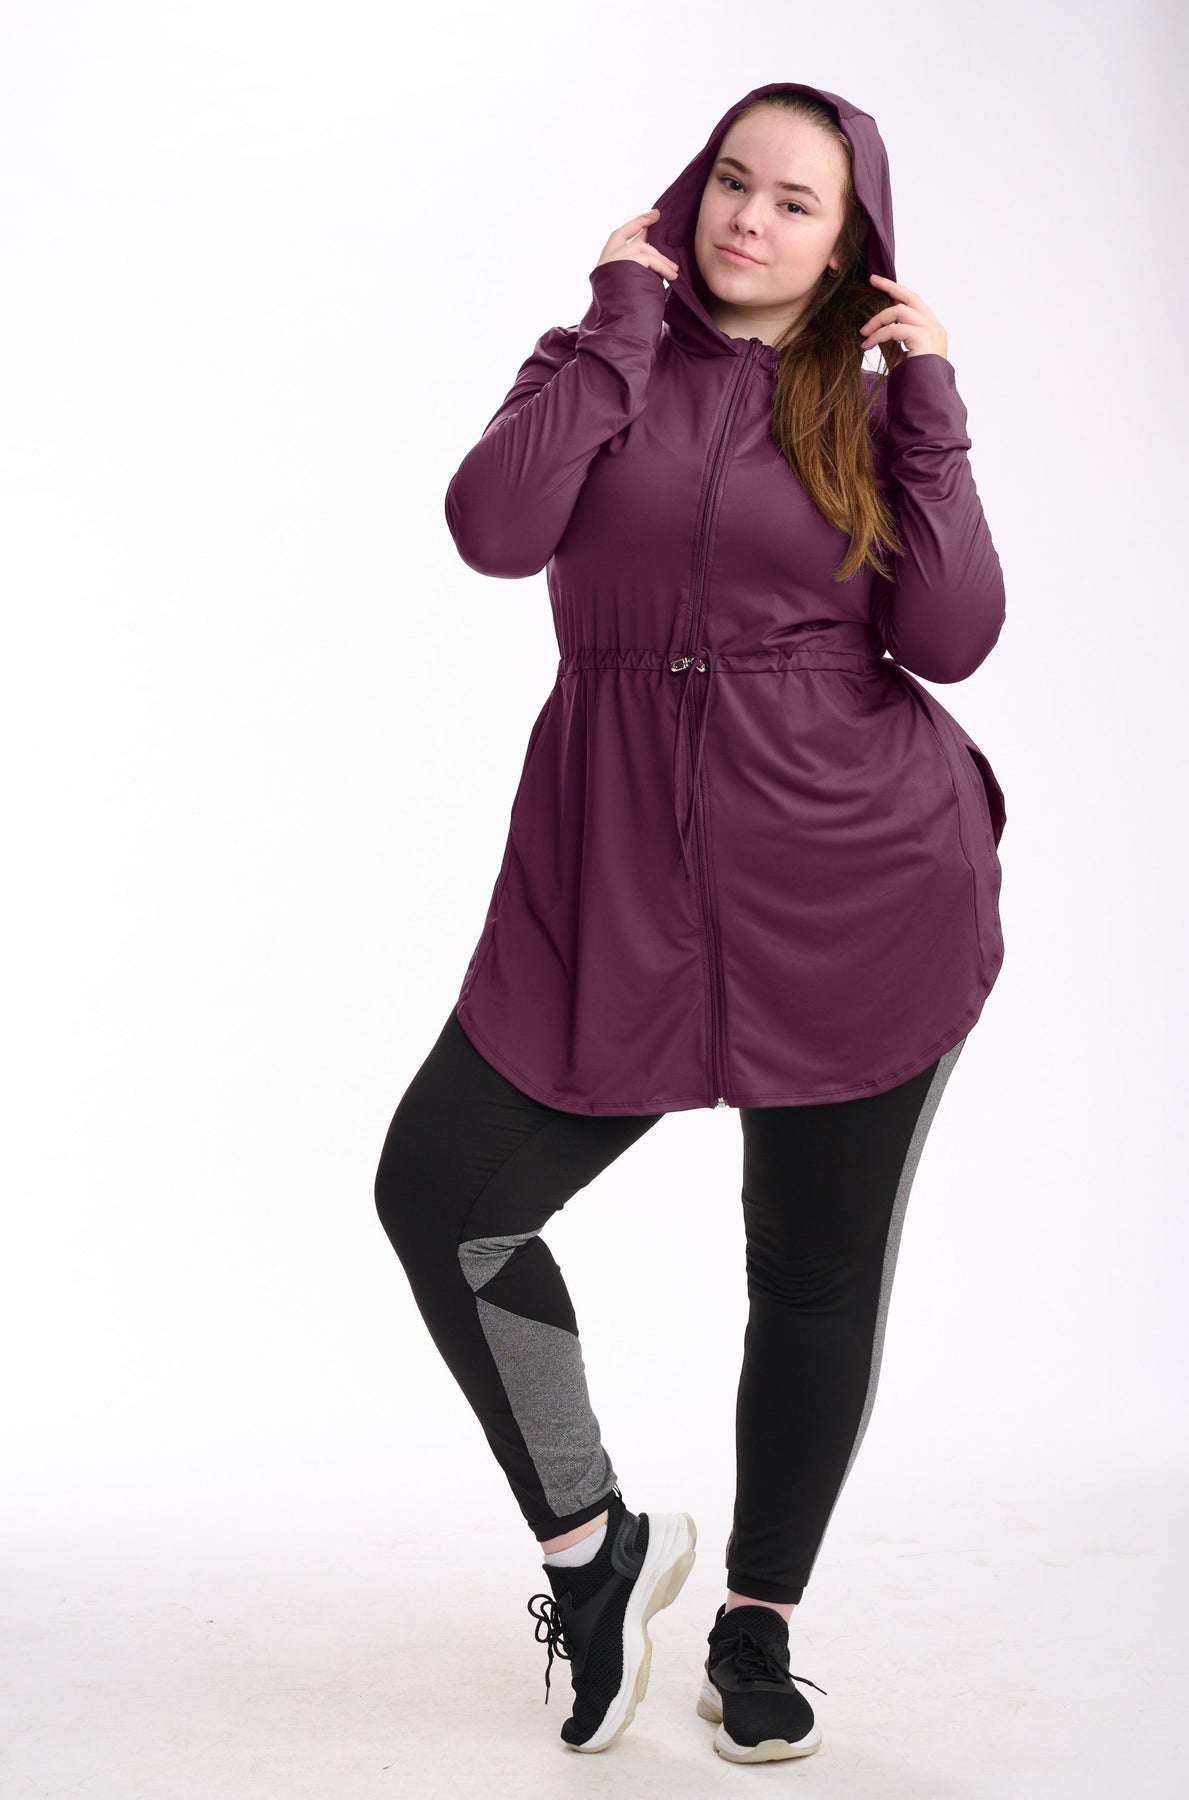 On-The-Go Modest Sports Jacket- Dignitii, Modest Sportswear, Long Sleeves  Loose Workout top, Modest swimwear Burkini